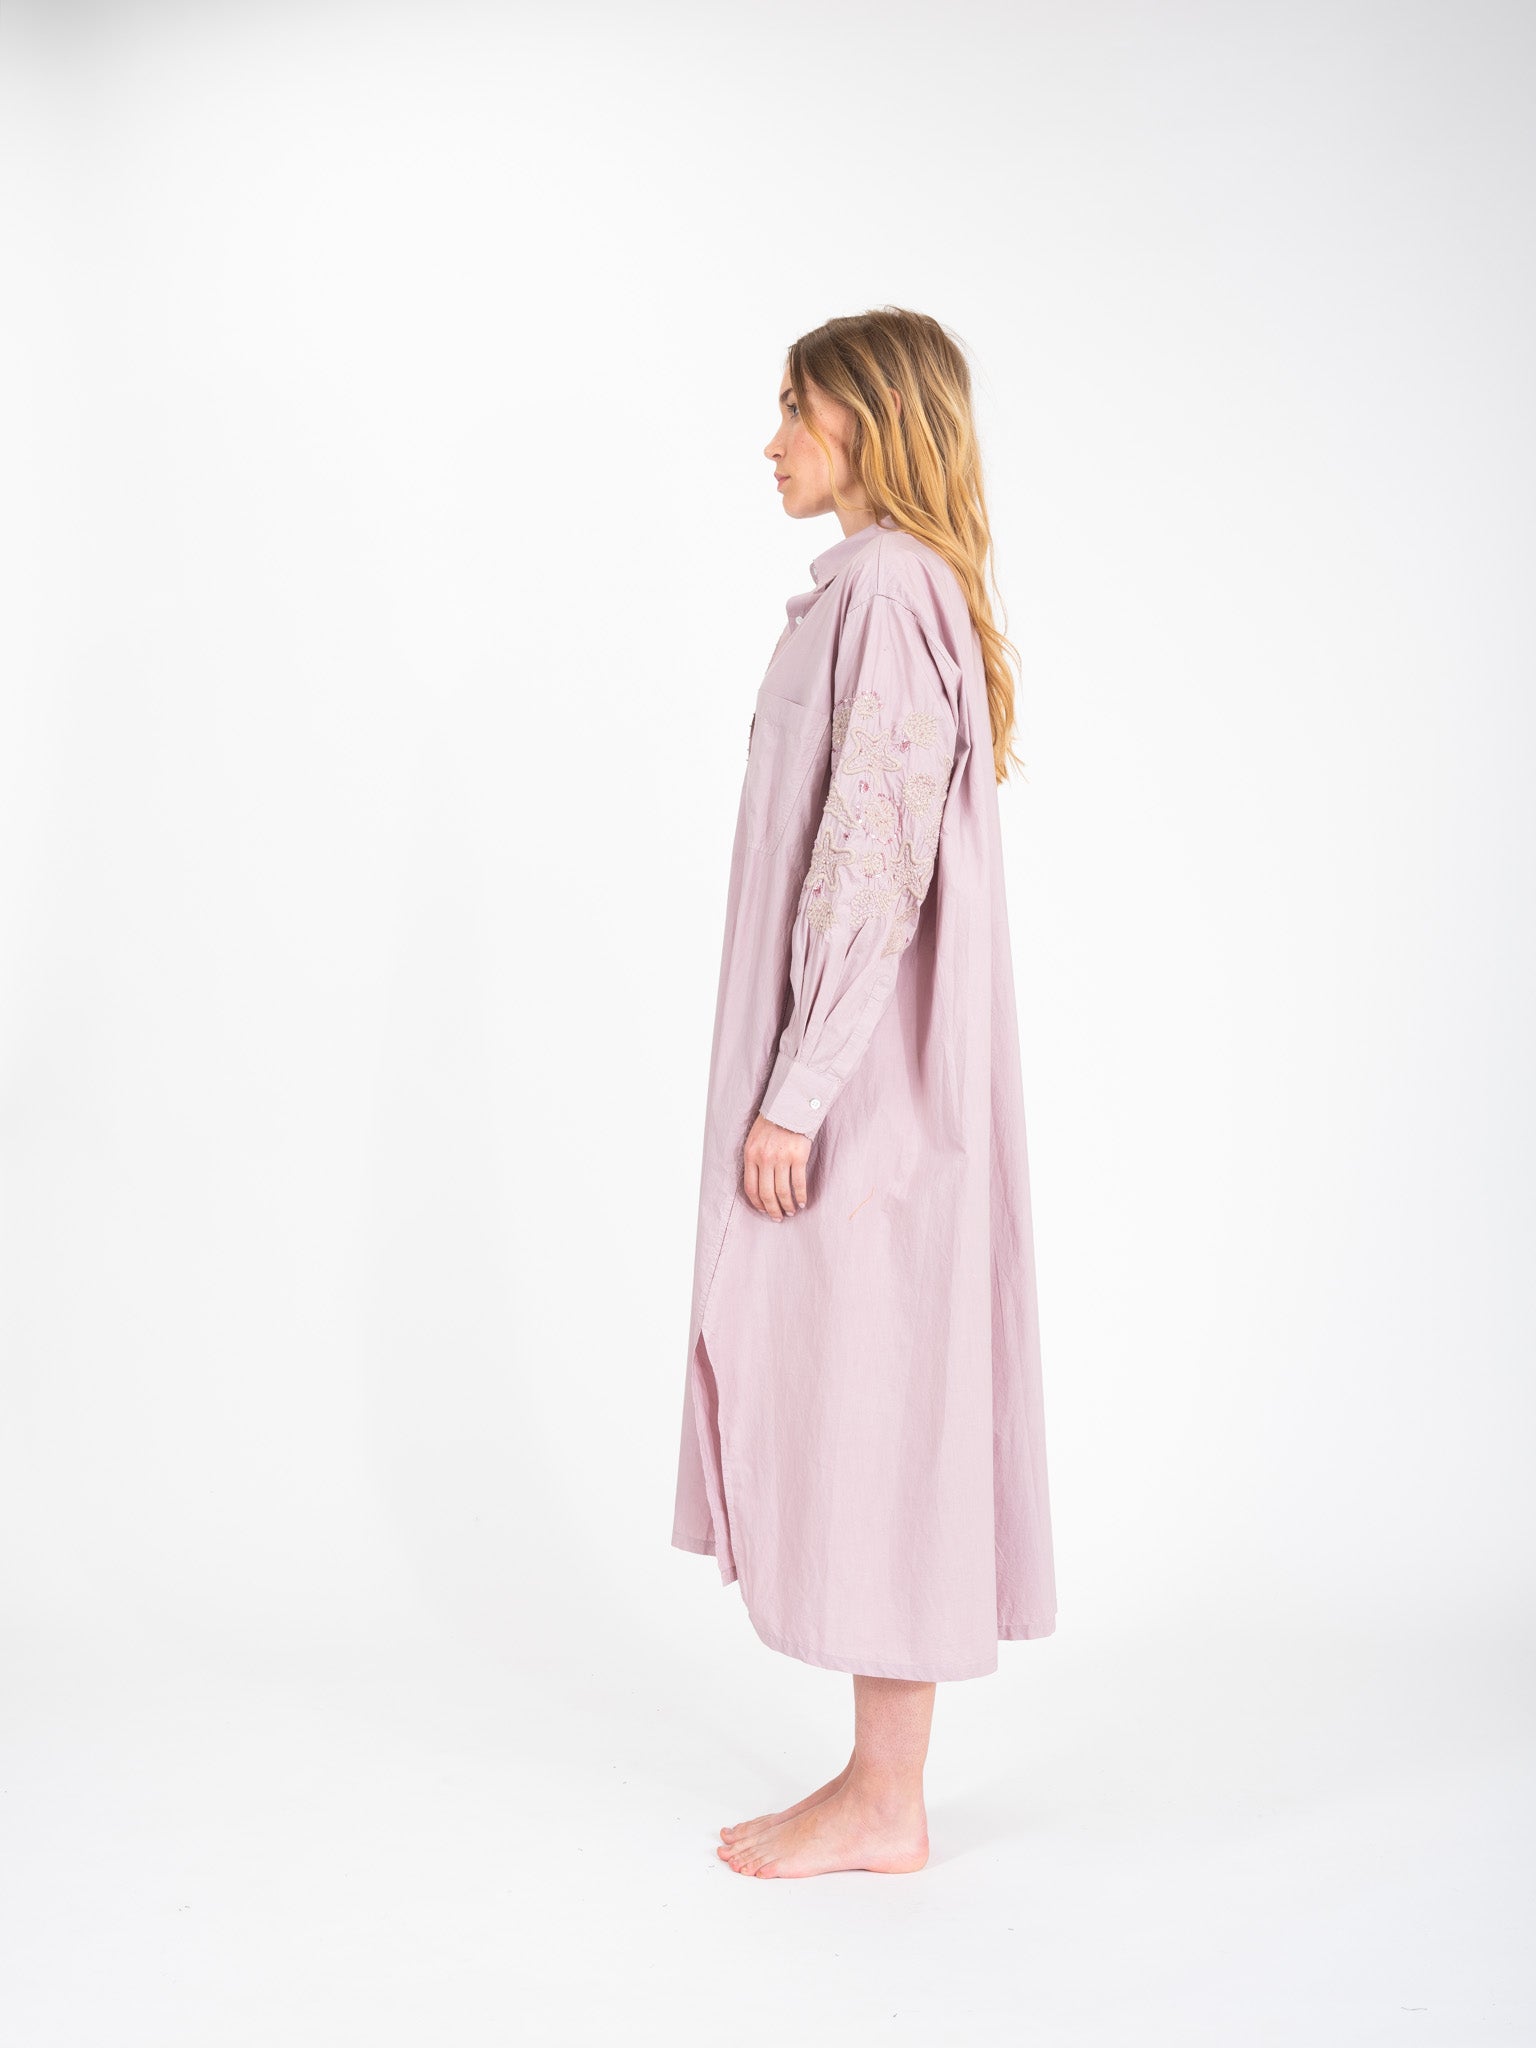 Robe longue rose poudré brodée coquillage Ogaan